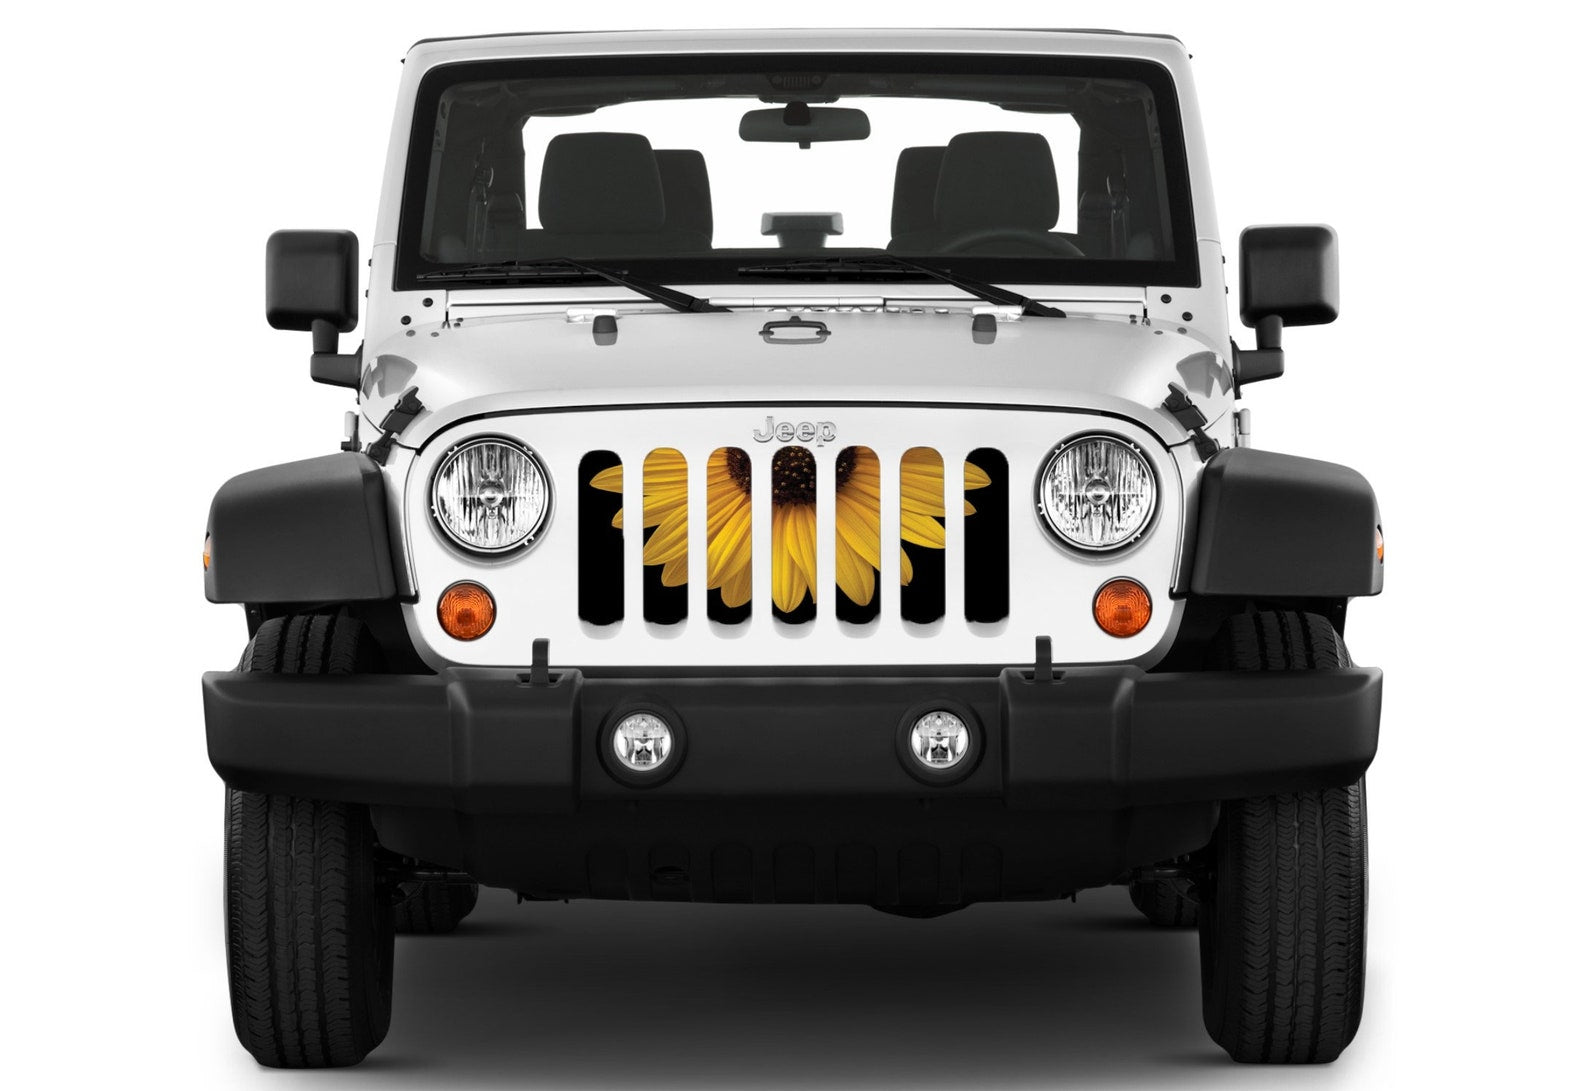 Half of a Sunflower design being showcased on a white Jeep Wrangler